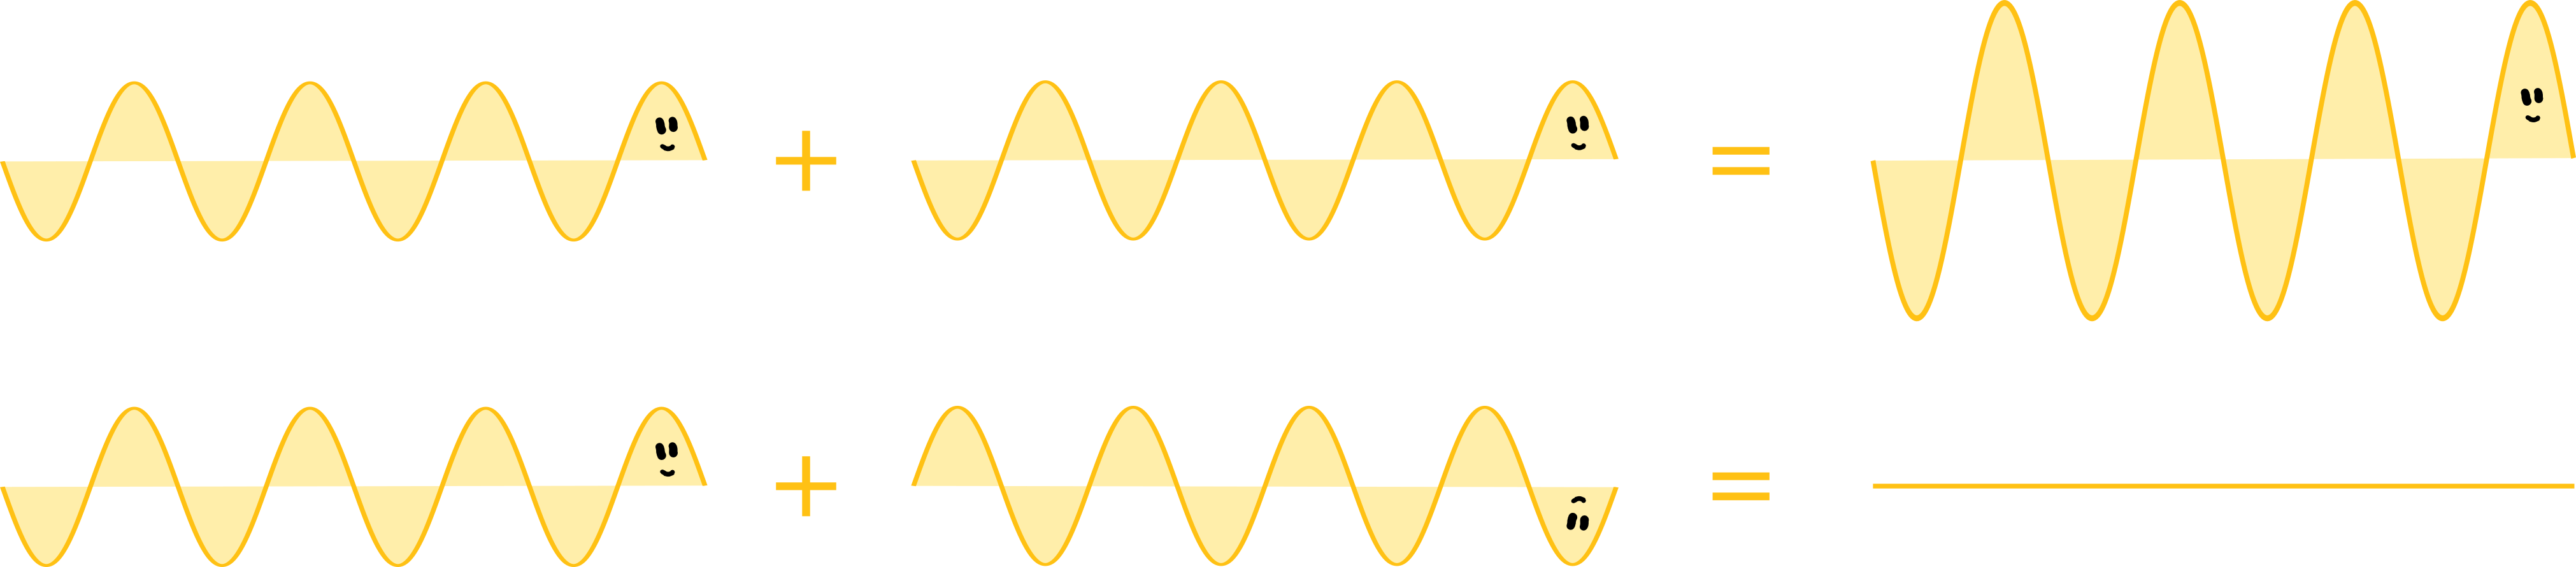 Interference of two wave